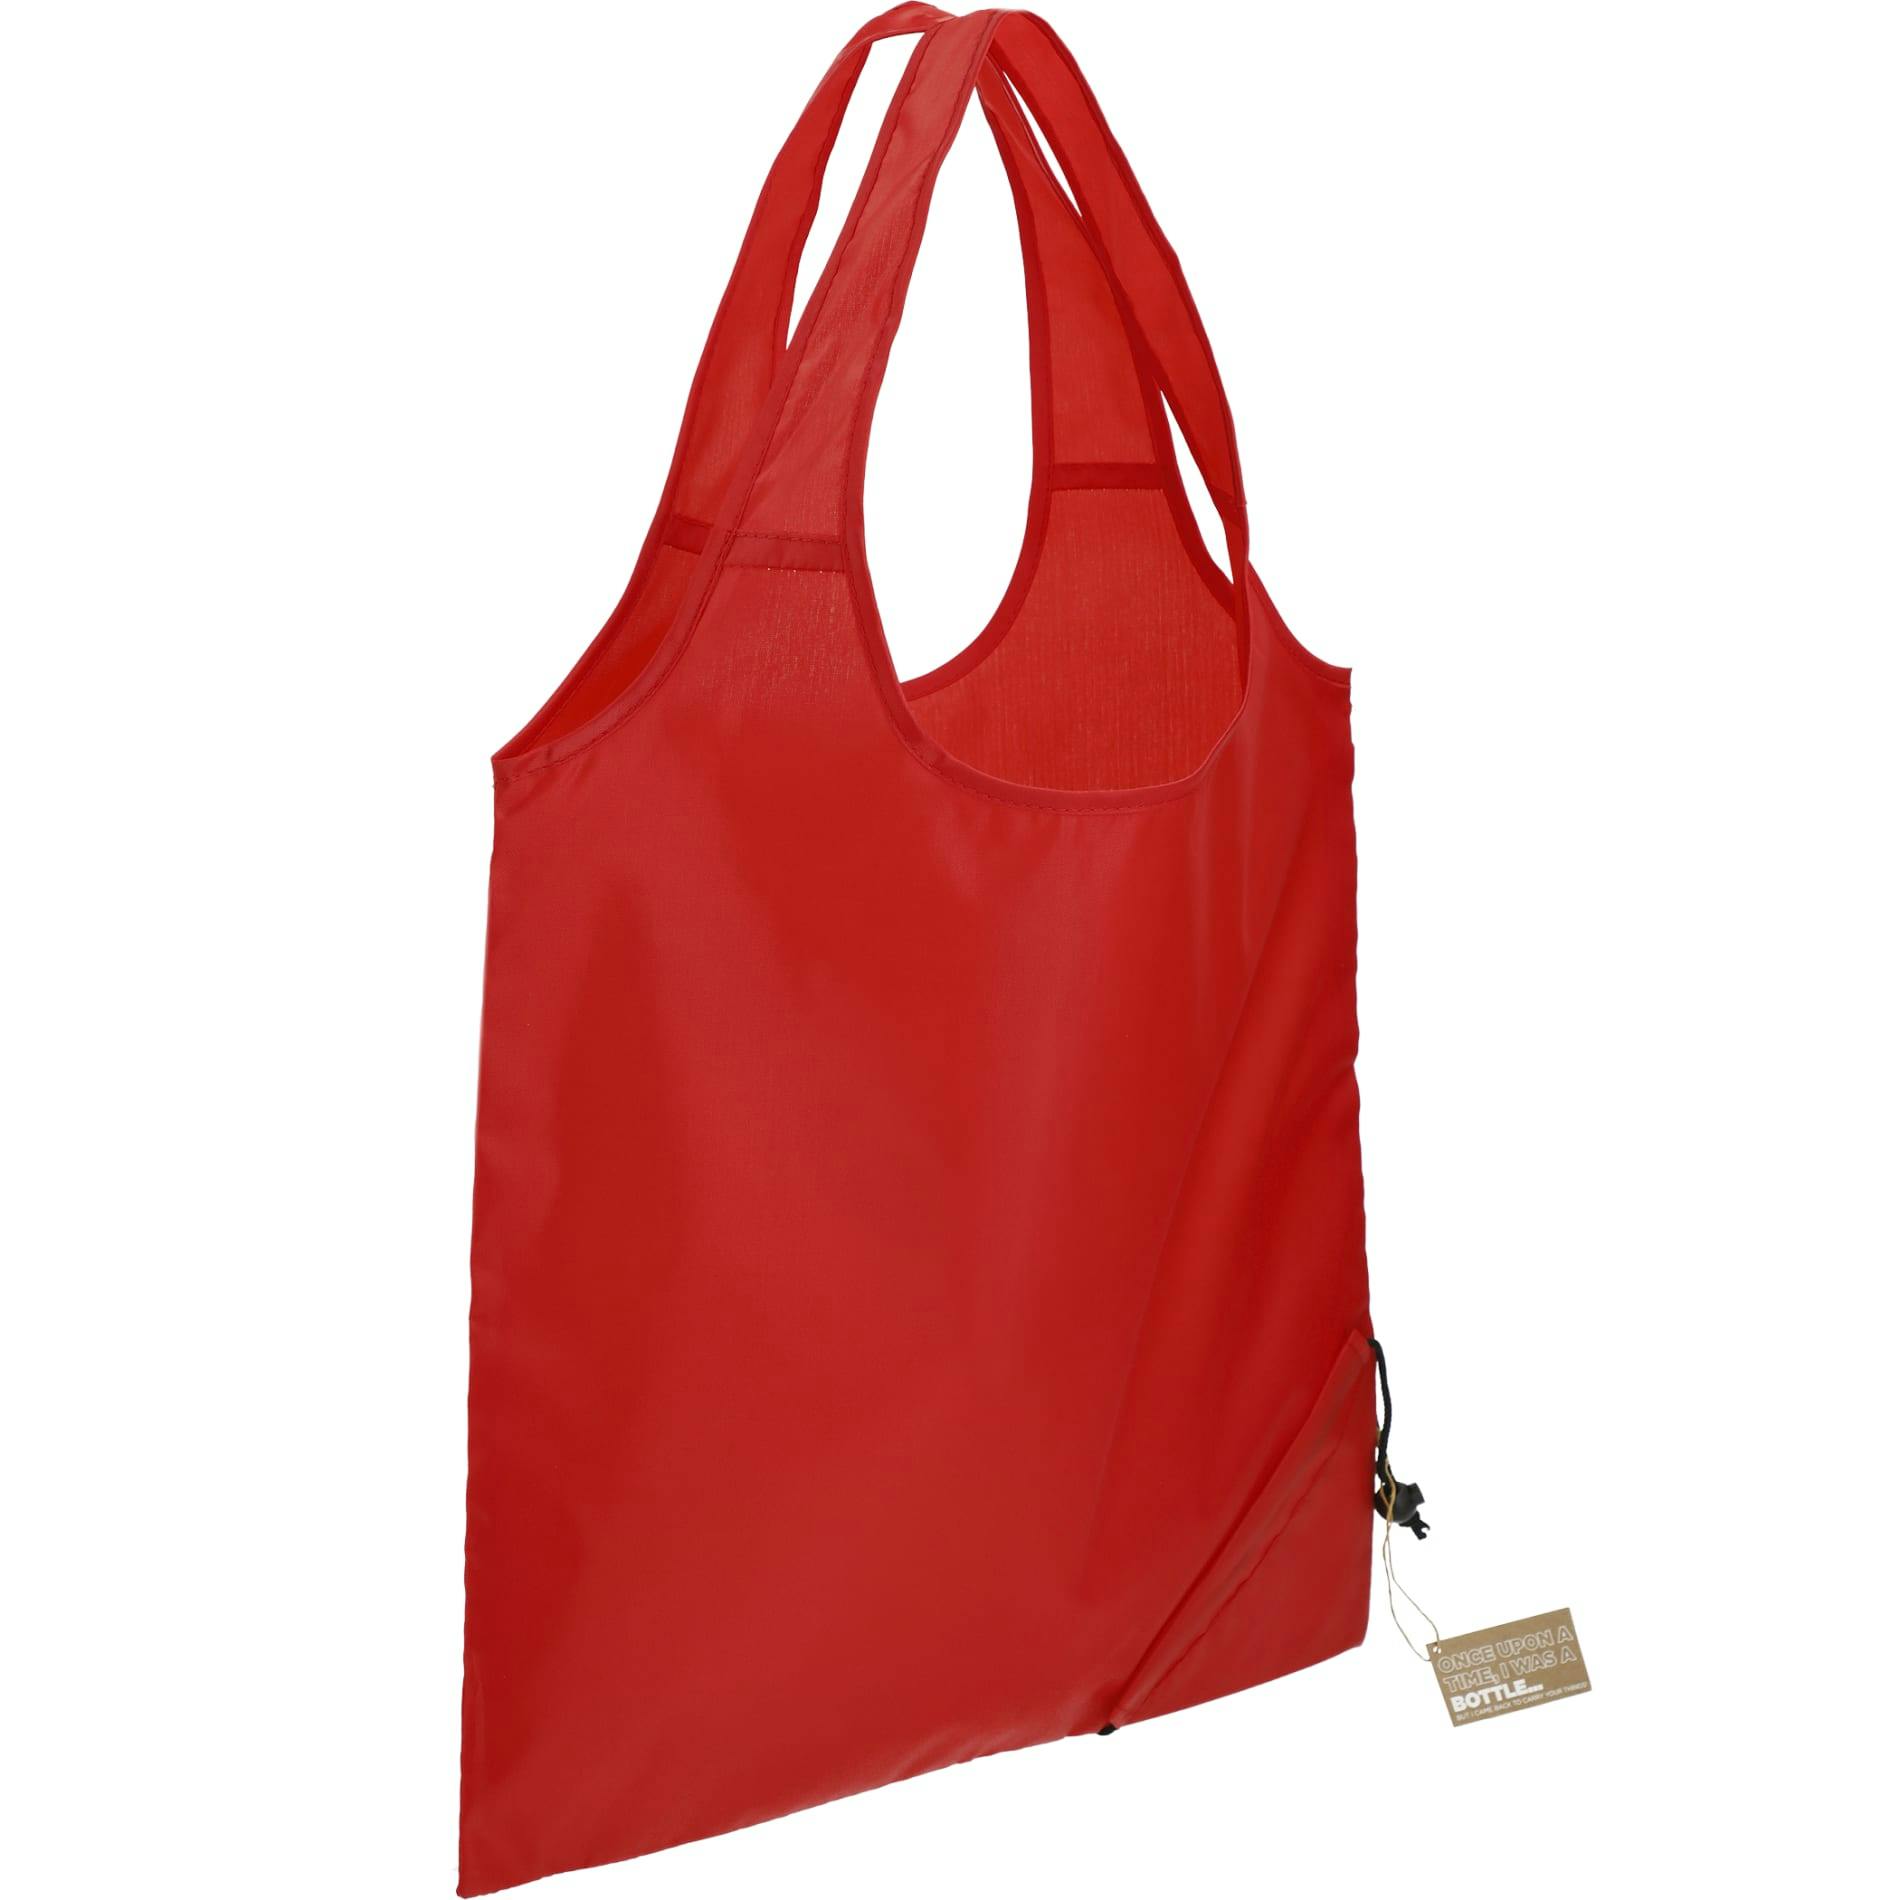 Bungalow RPET Foldable Shopper Tote - additional Image 3